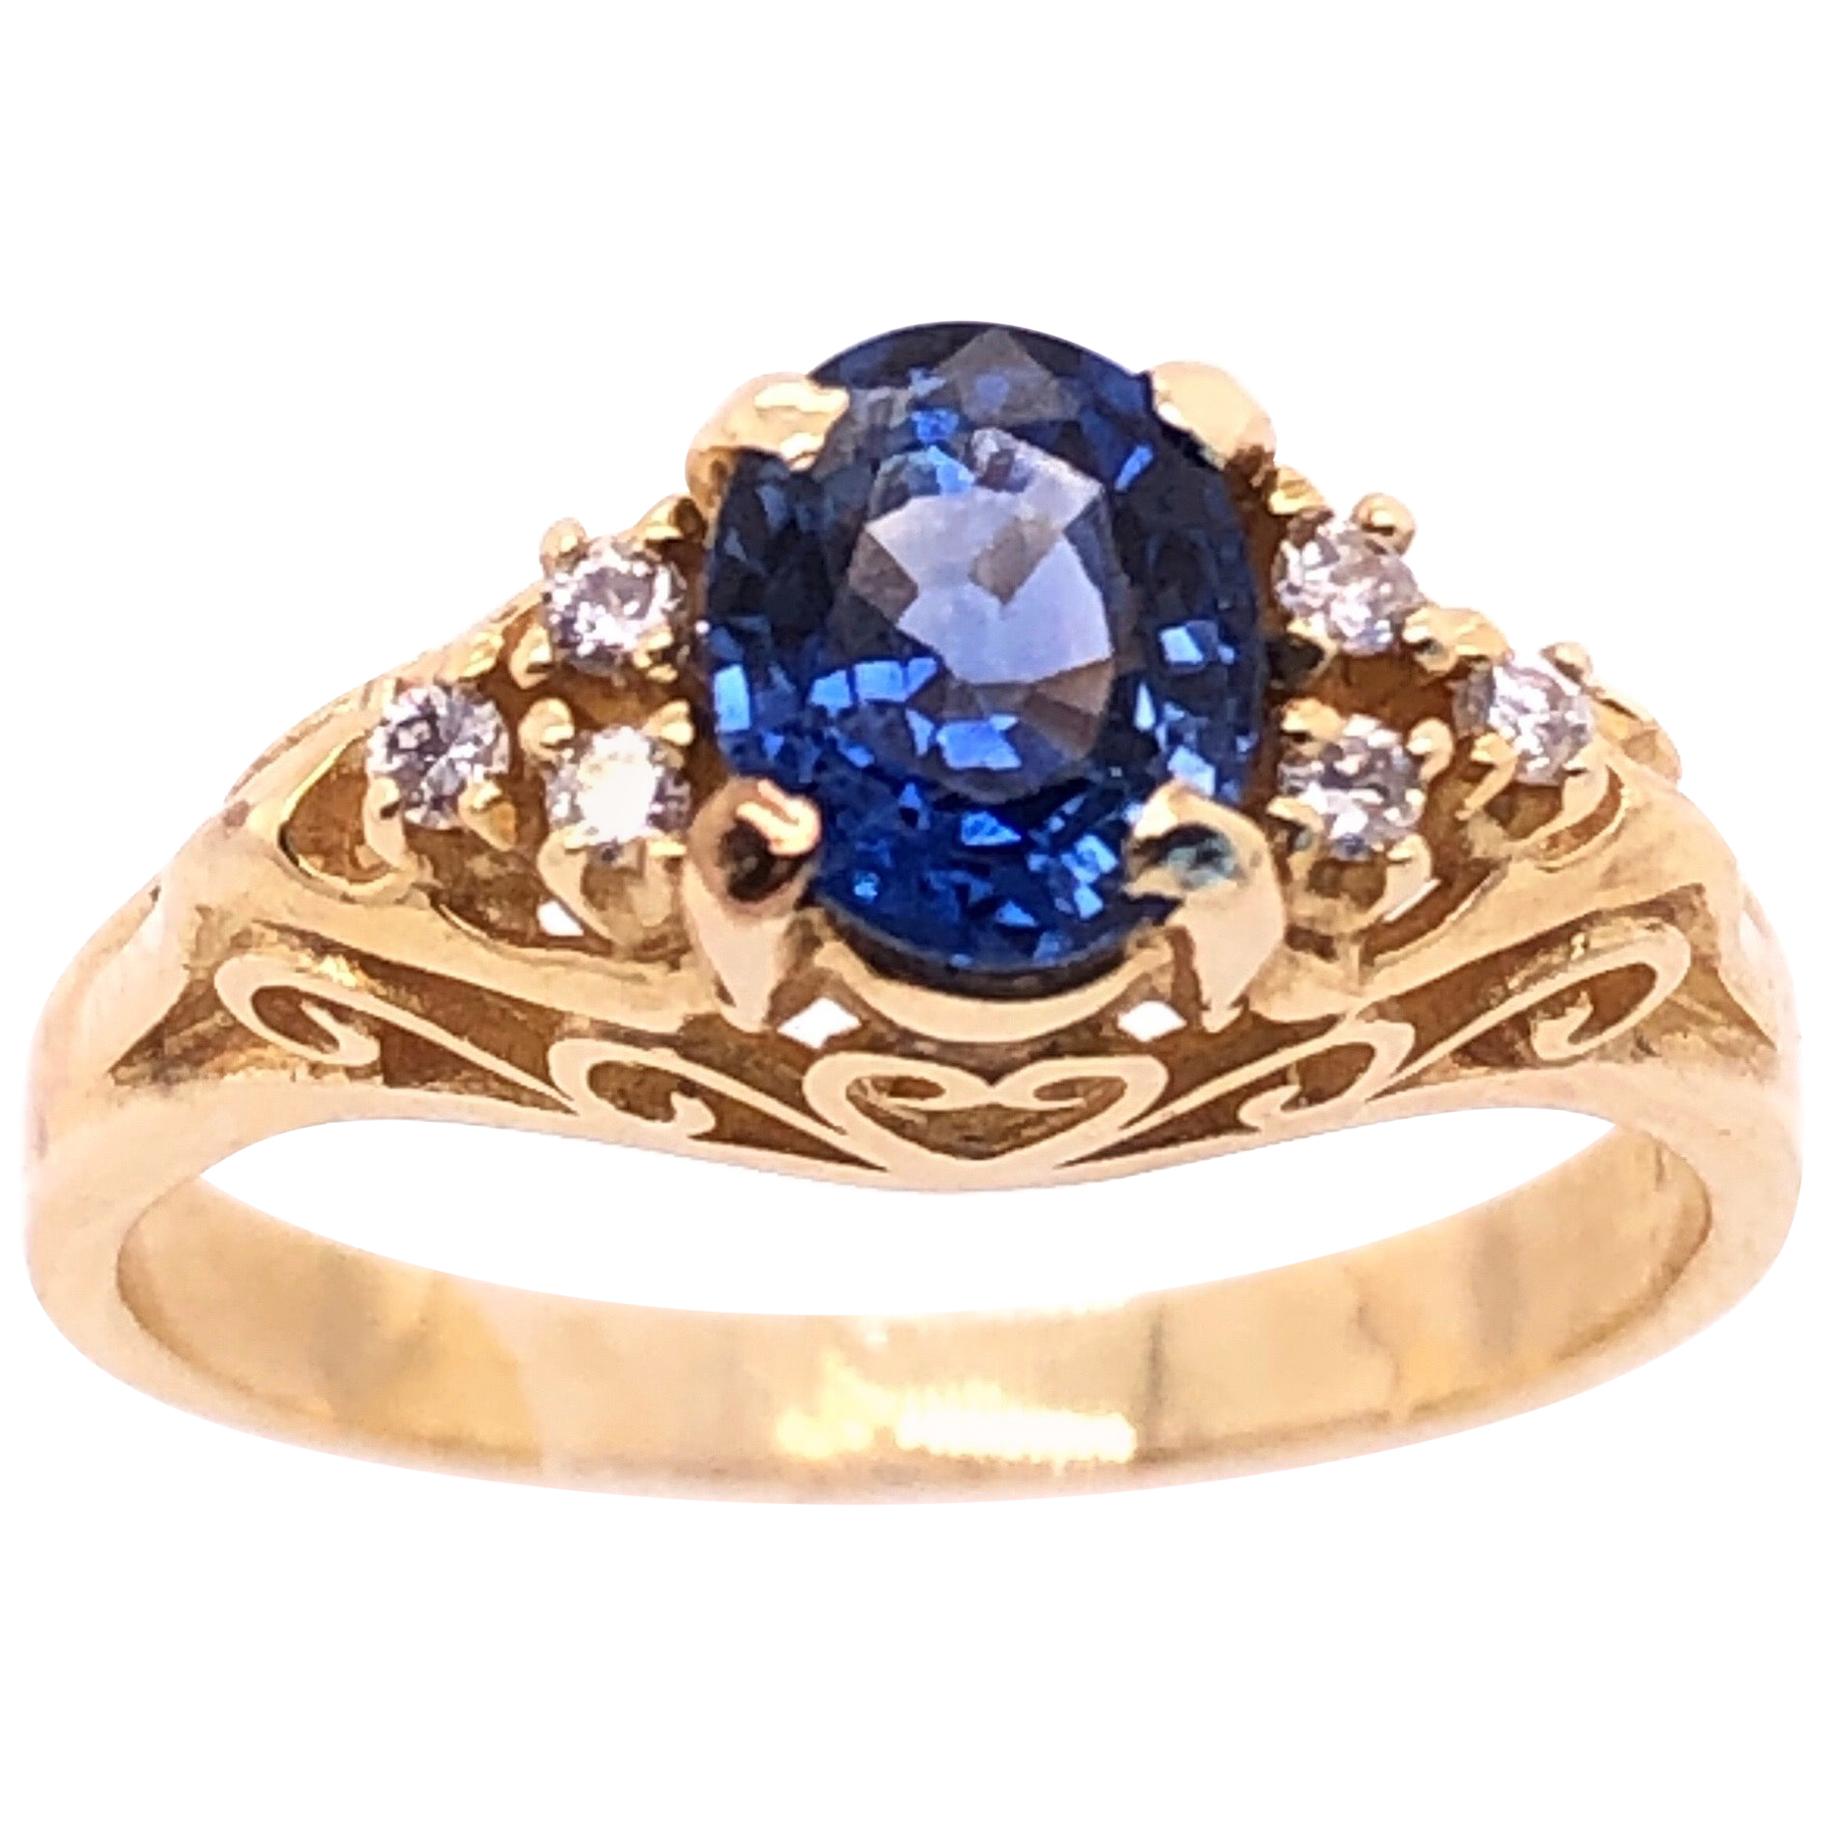 14 Karat Yellow Gold Sapphire Solitaire Ring with Side Diamond Accents